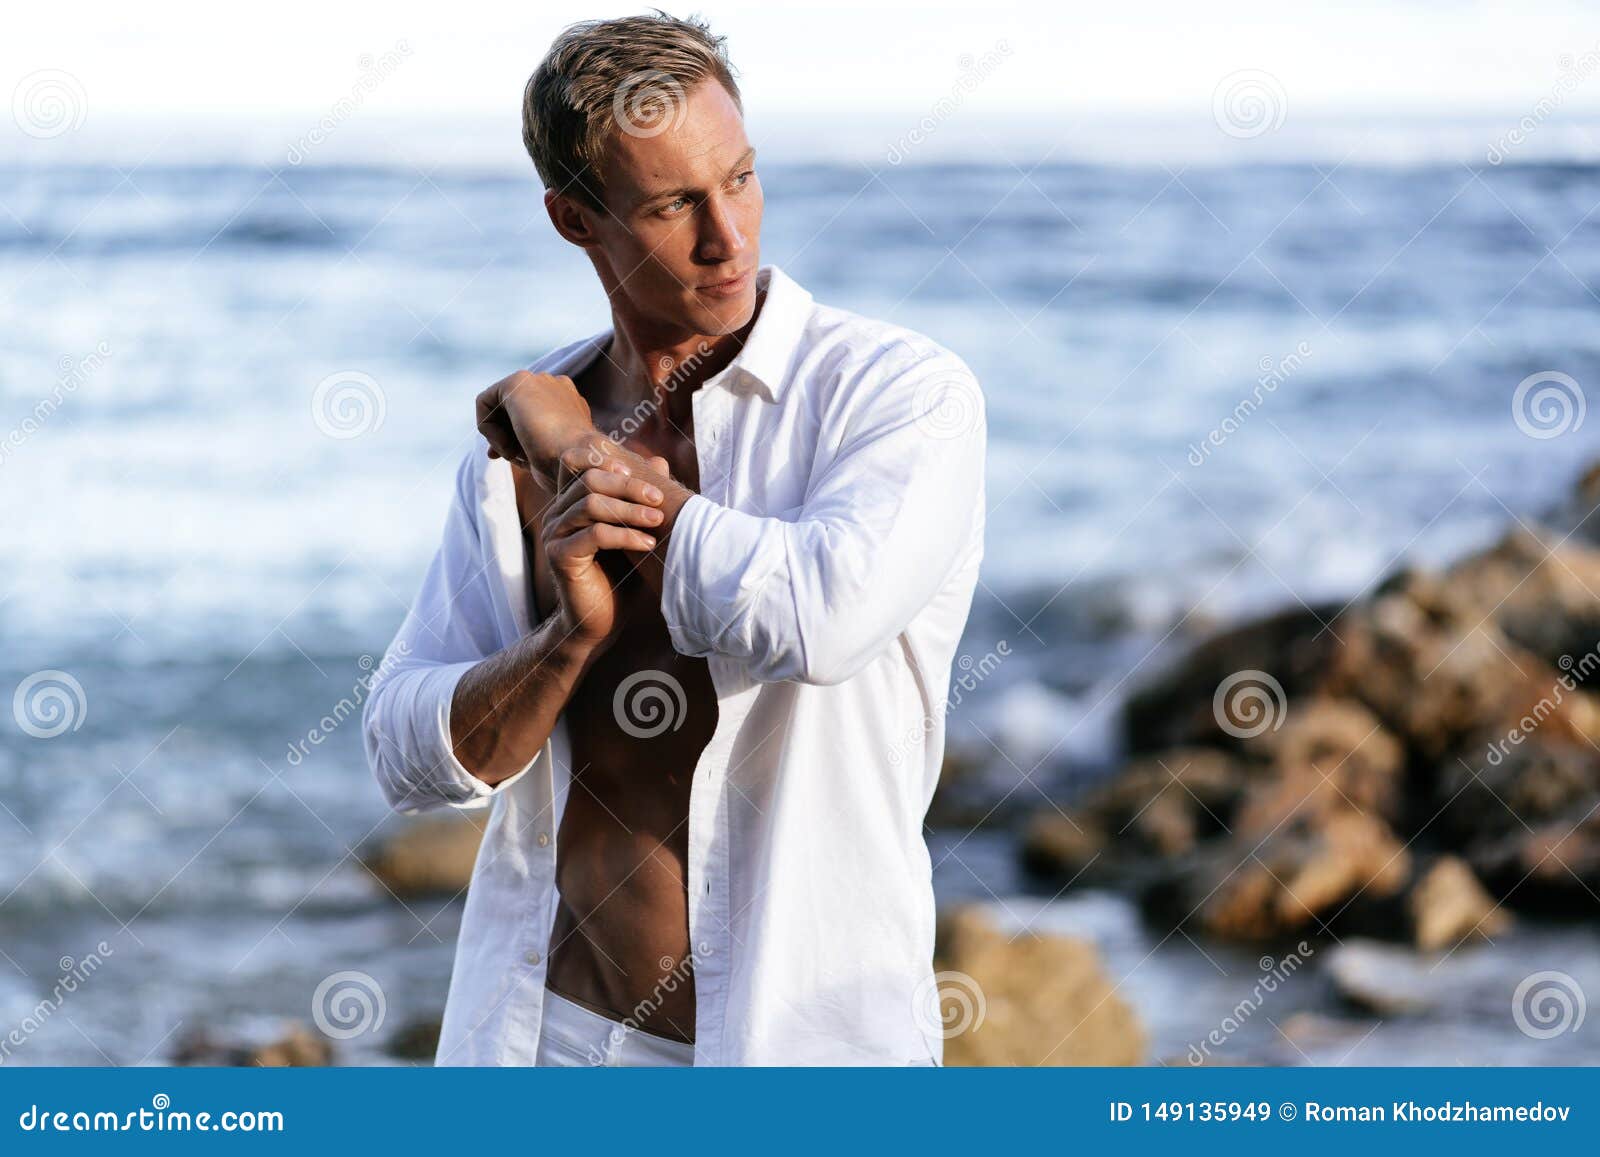 Portrait of Athletic Man in White Shirt Rests on Beach, Ocean at ...